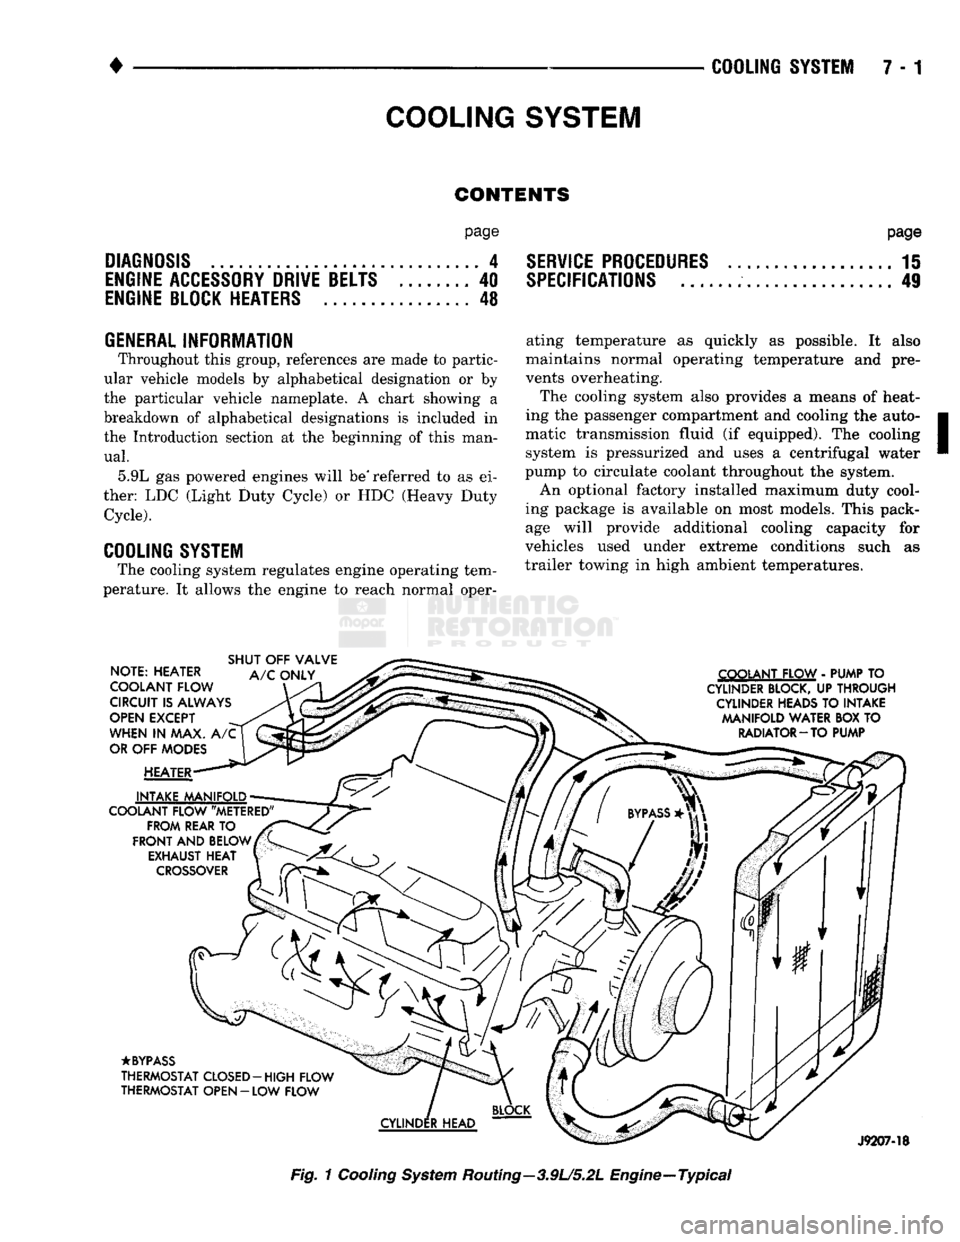 DODGE TRUCK 1993  Service Repair Manual 
COOLING SYSTEM 

CONTENTS page 

DIAGNOSIS
 ... 4 

ENGINE
 ACCESSORY
 DRIVE BELTS
 40 

ENGINE
 BLOCK HEATERS
 48 

GENERAL
 INFORMATION 
 Throughout this group, references are made to partic­
ular